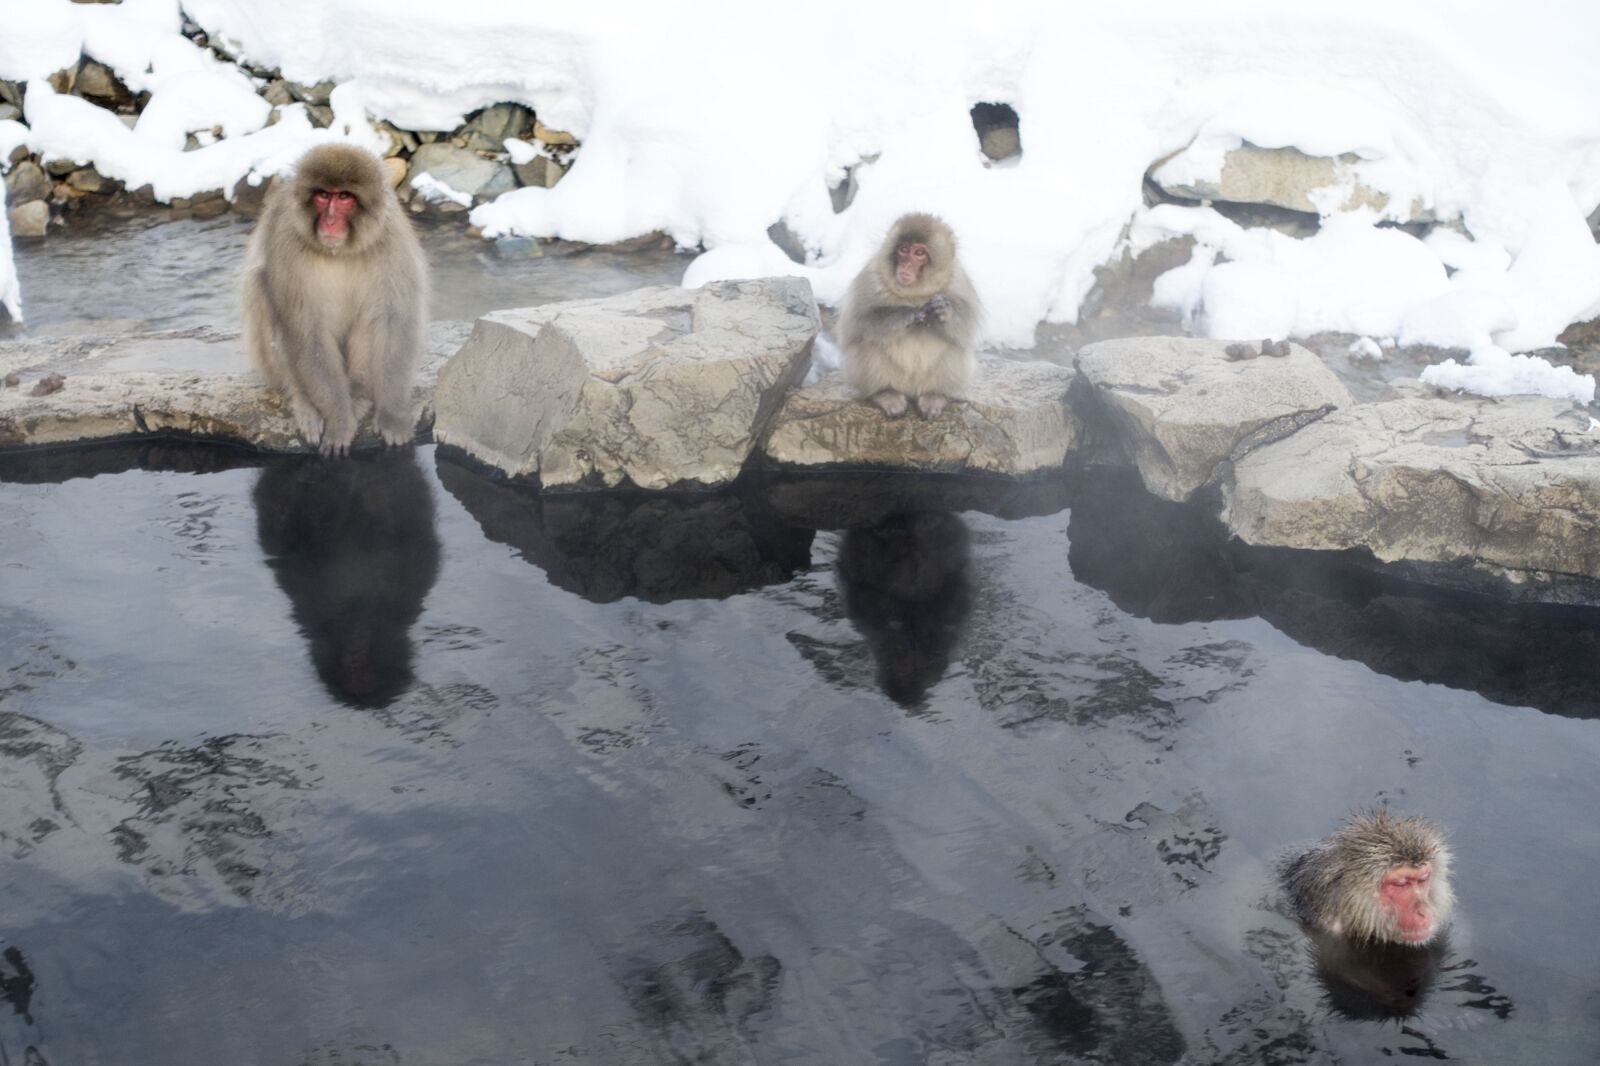 Sony Cyber-shot DSC-RX100 III sample photo. Snow monkeys, macaque, primate photography